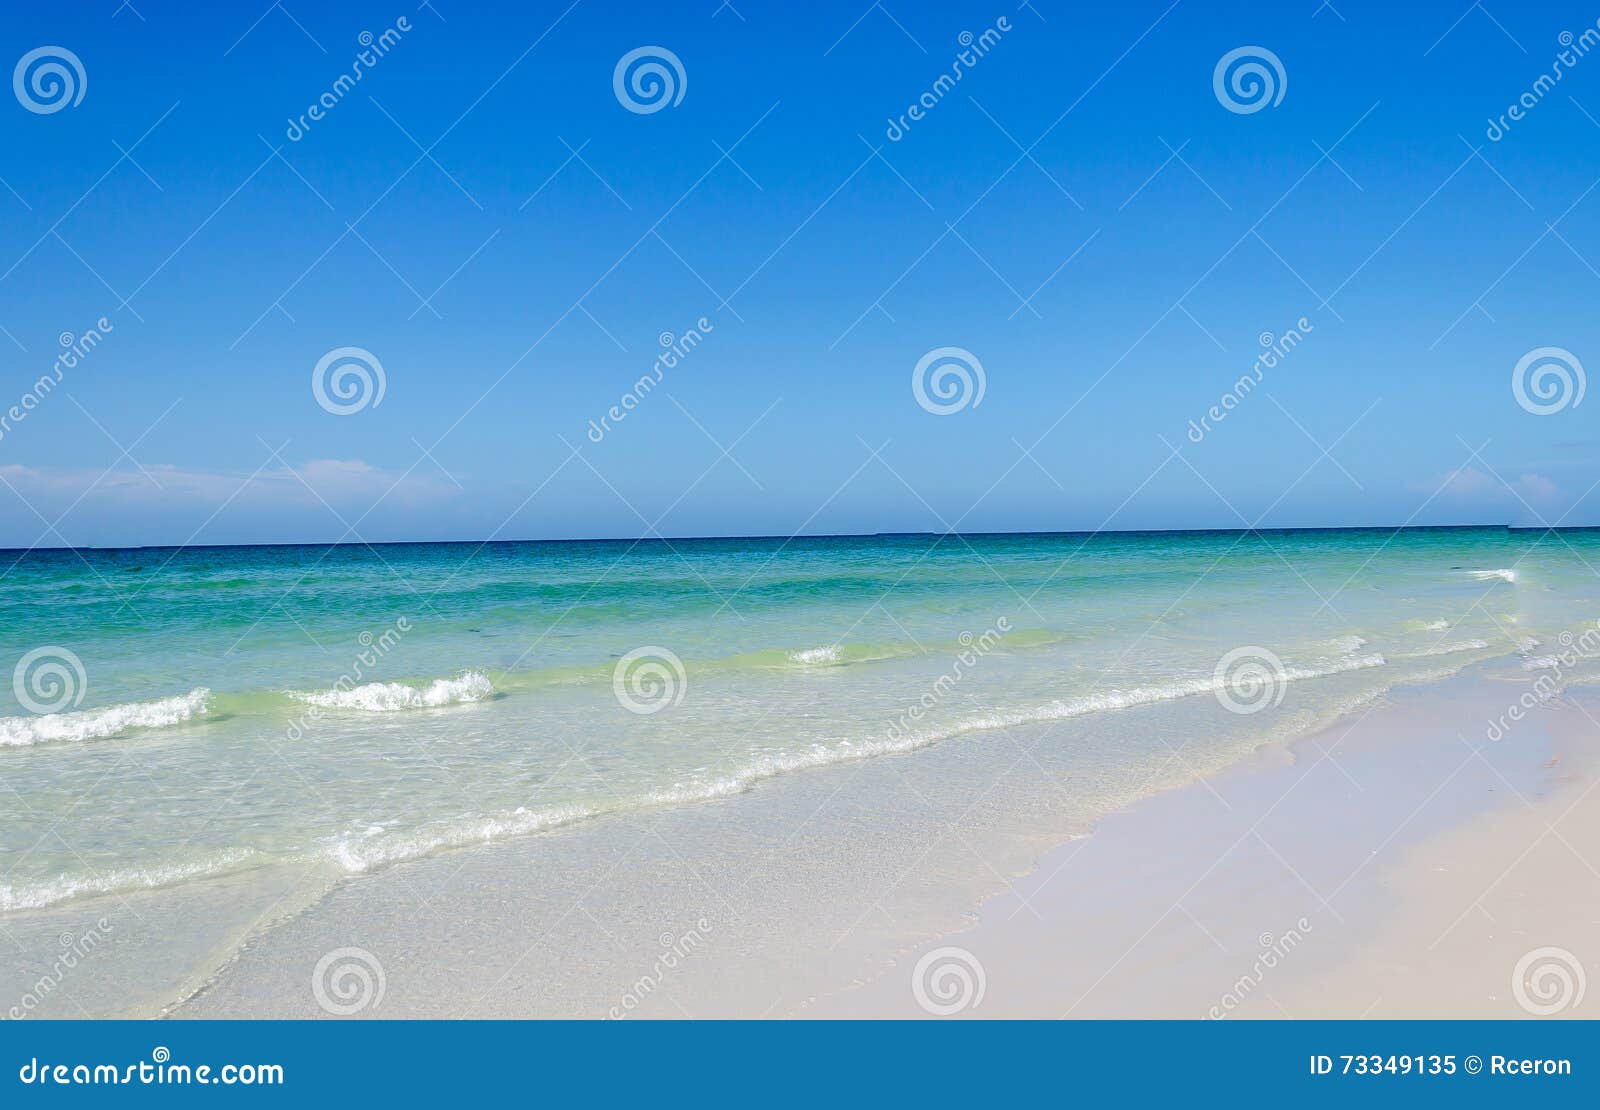 beautiful pristine beach surrounded by blue sky